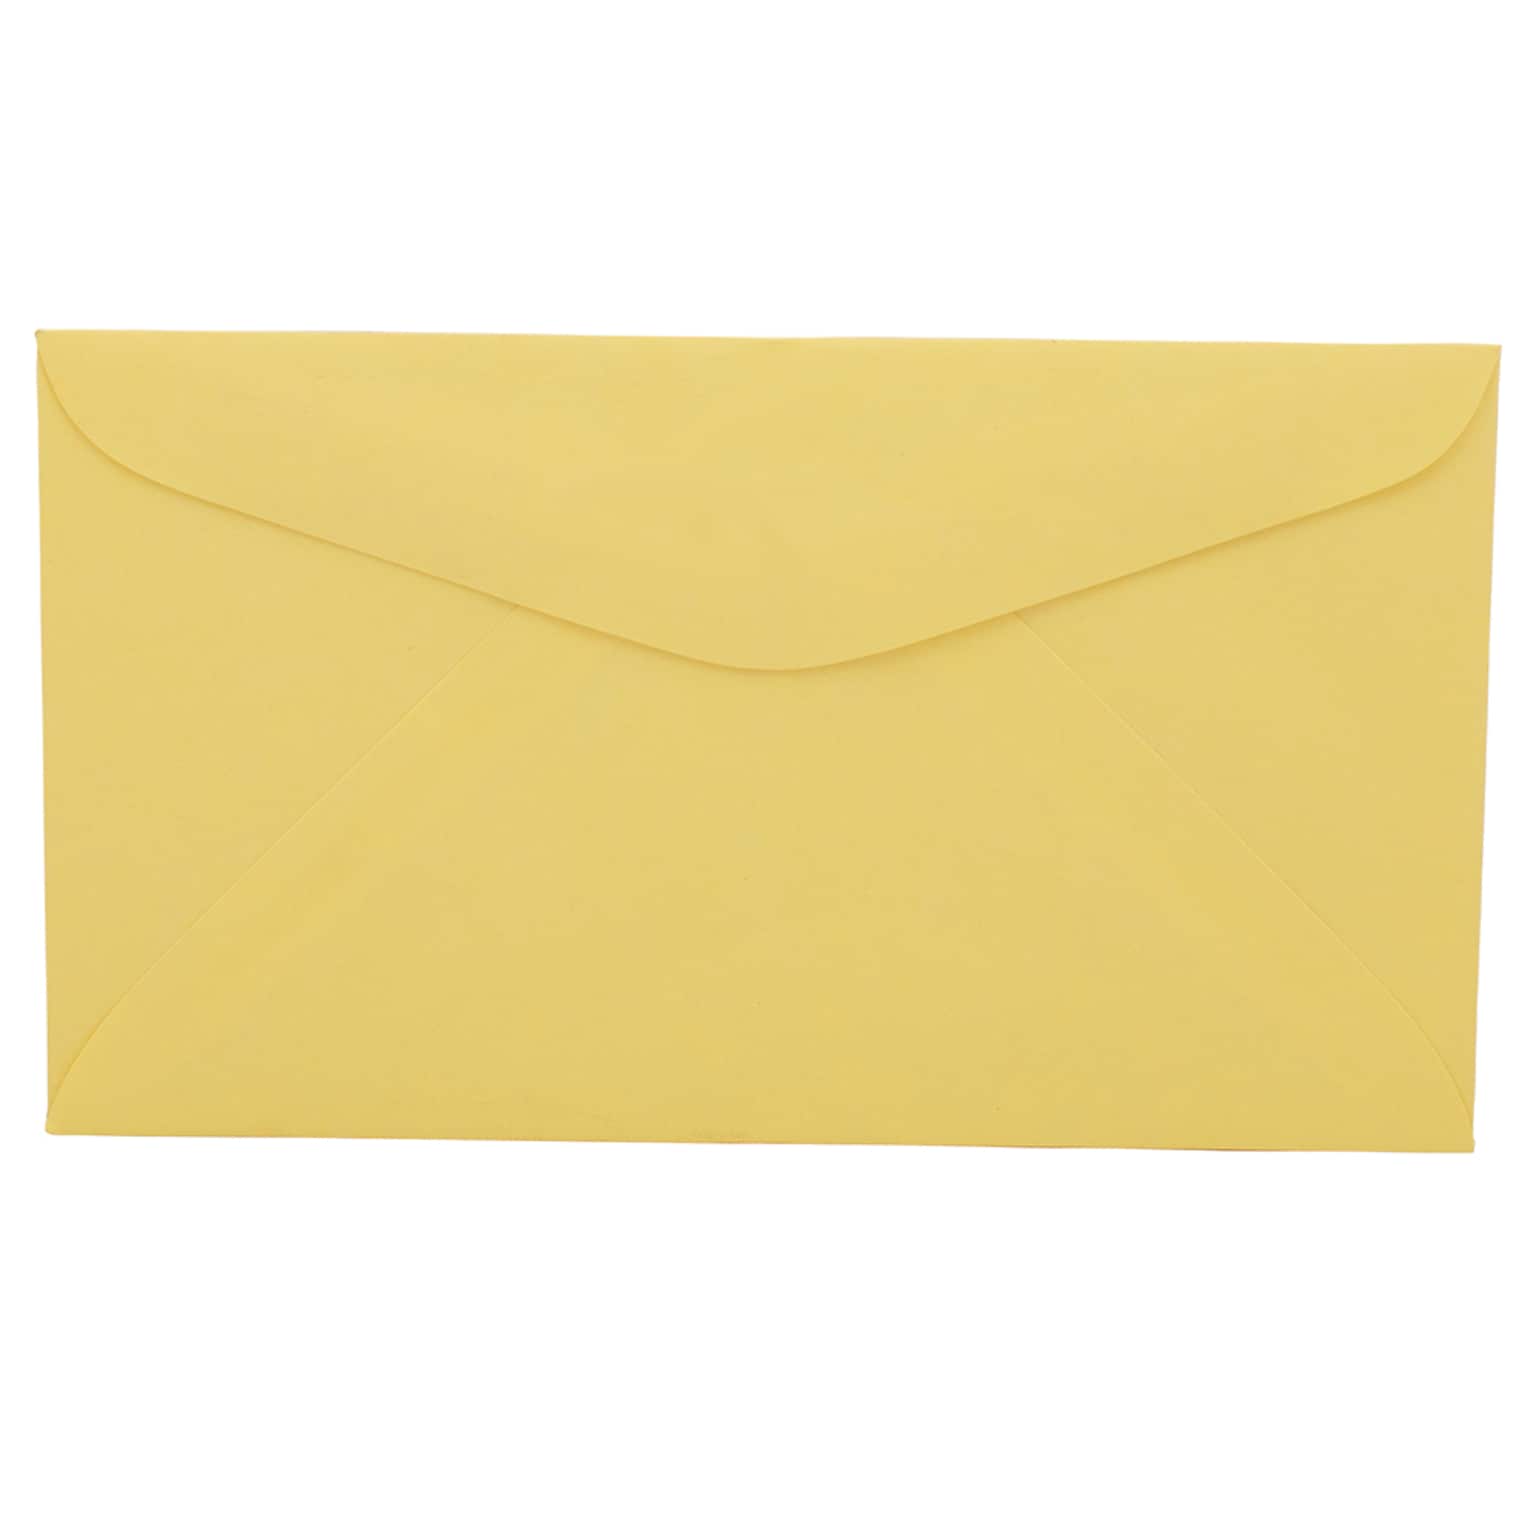 JAM Paper #6 3/4 Business Envelope, 3 5/8 x 6 1/2, Cary Yellow, 50/Pack (357617061C)